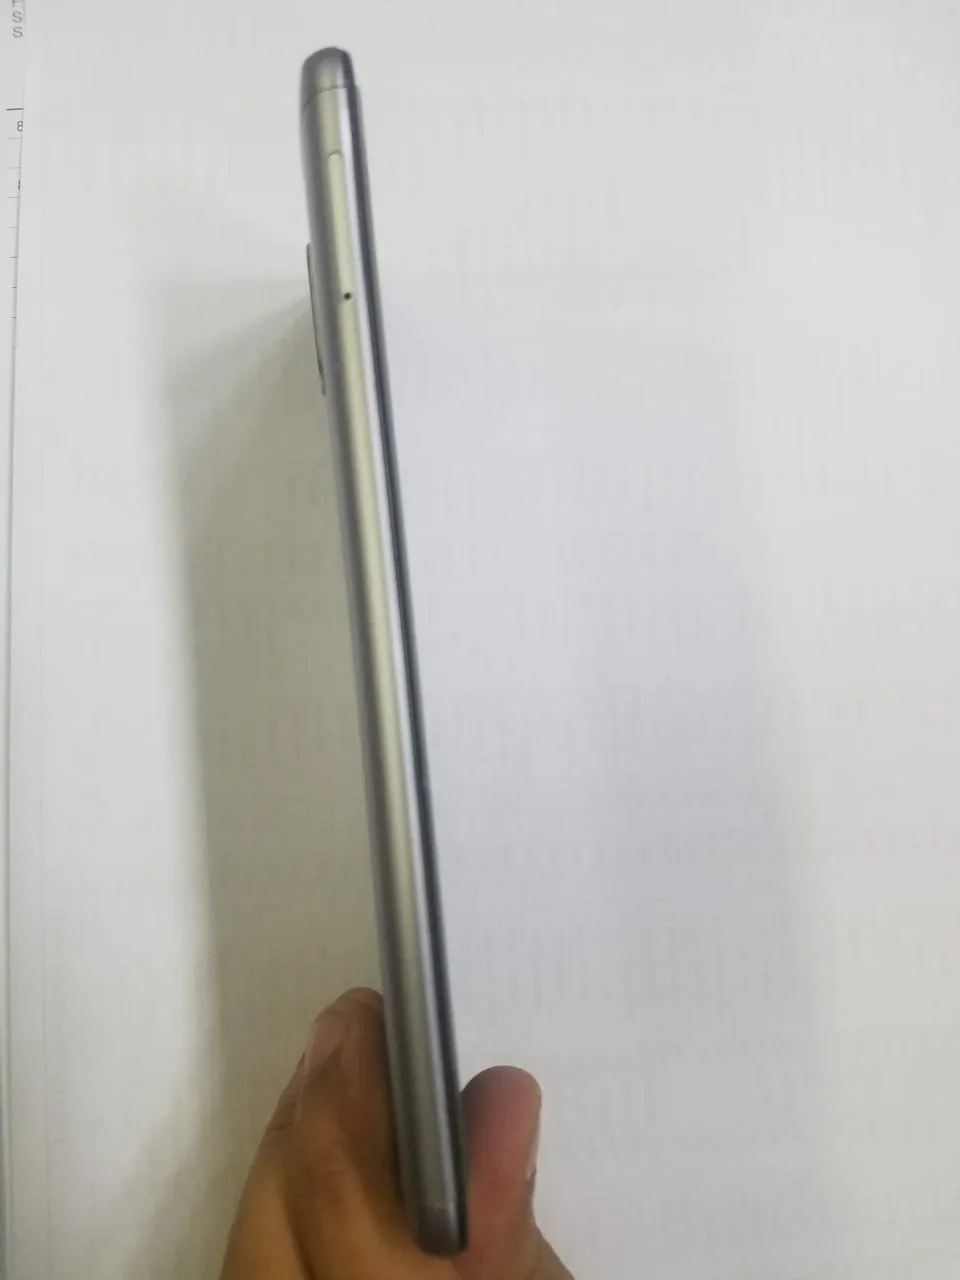 honor 6x gaurnteed non repaired condition 10/10 - photo 4